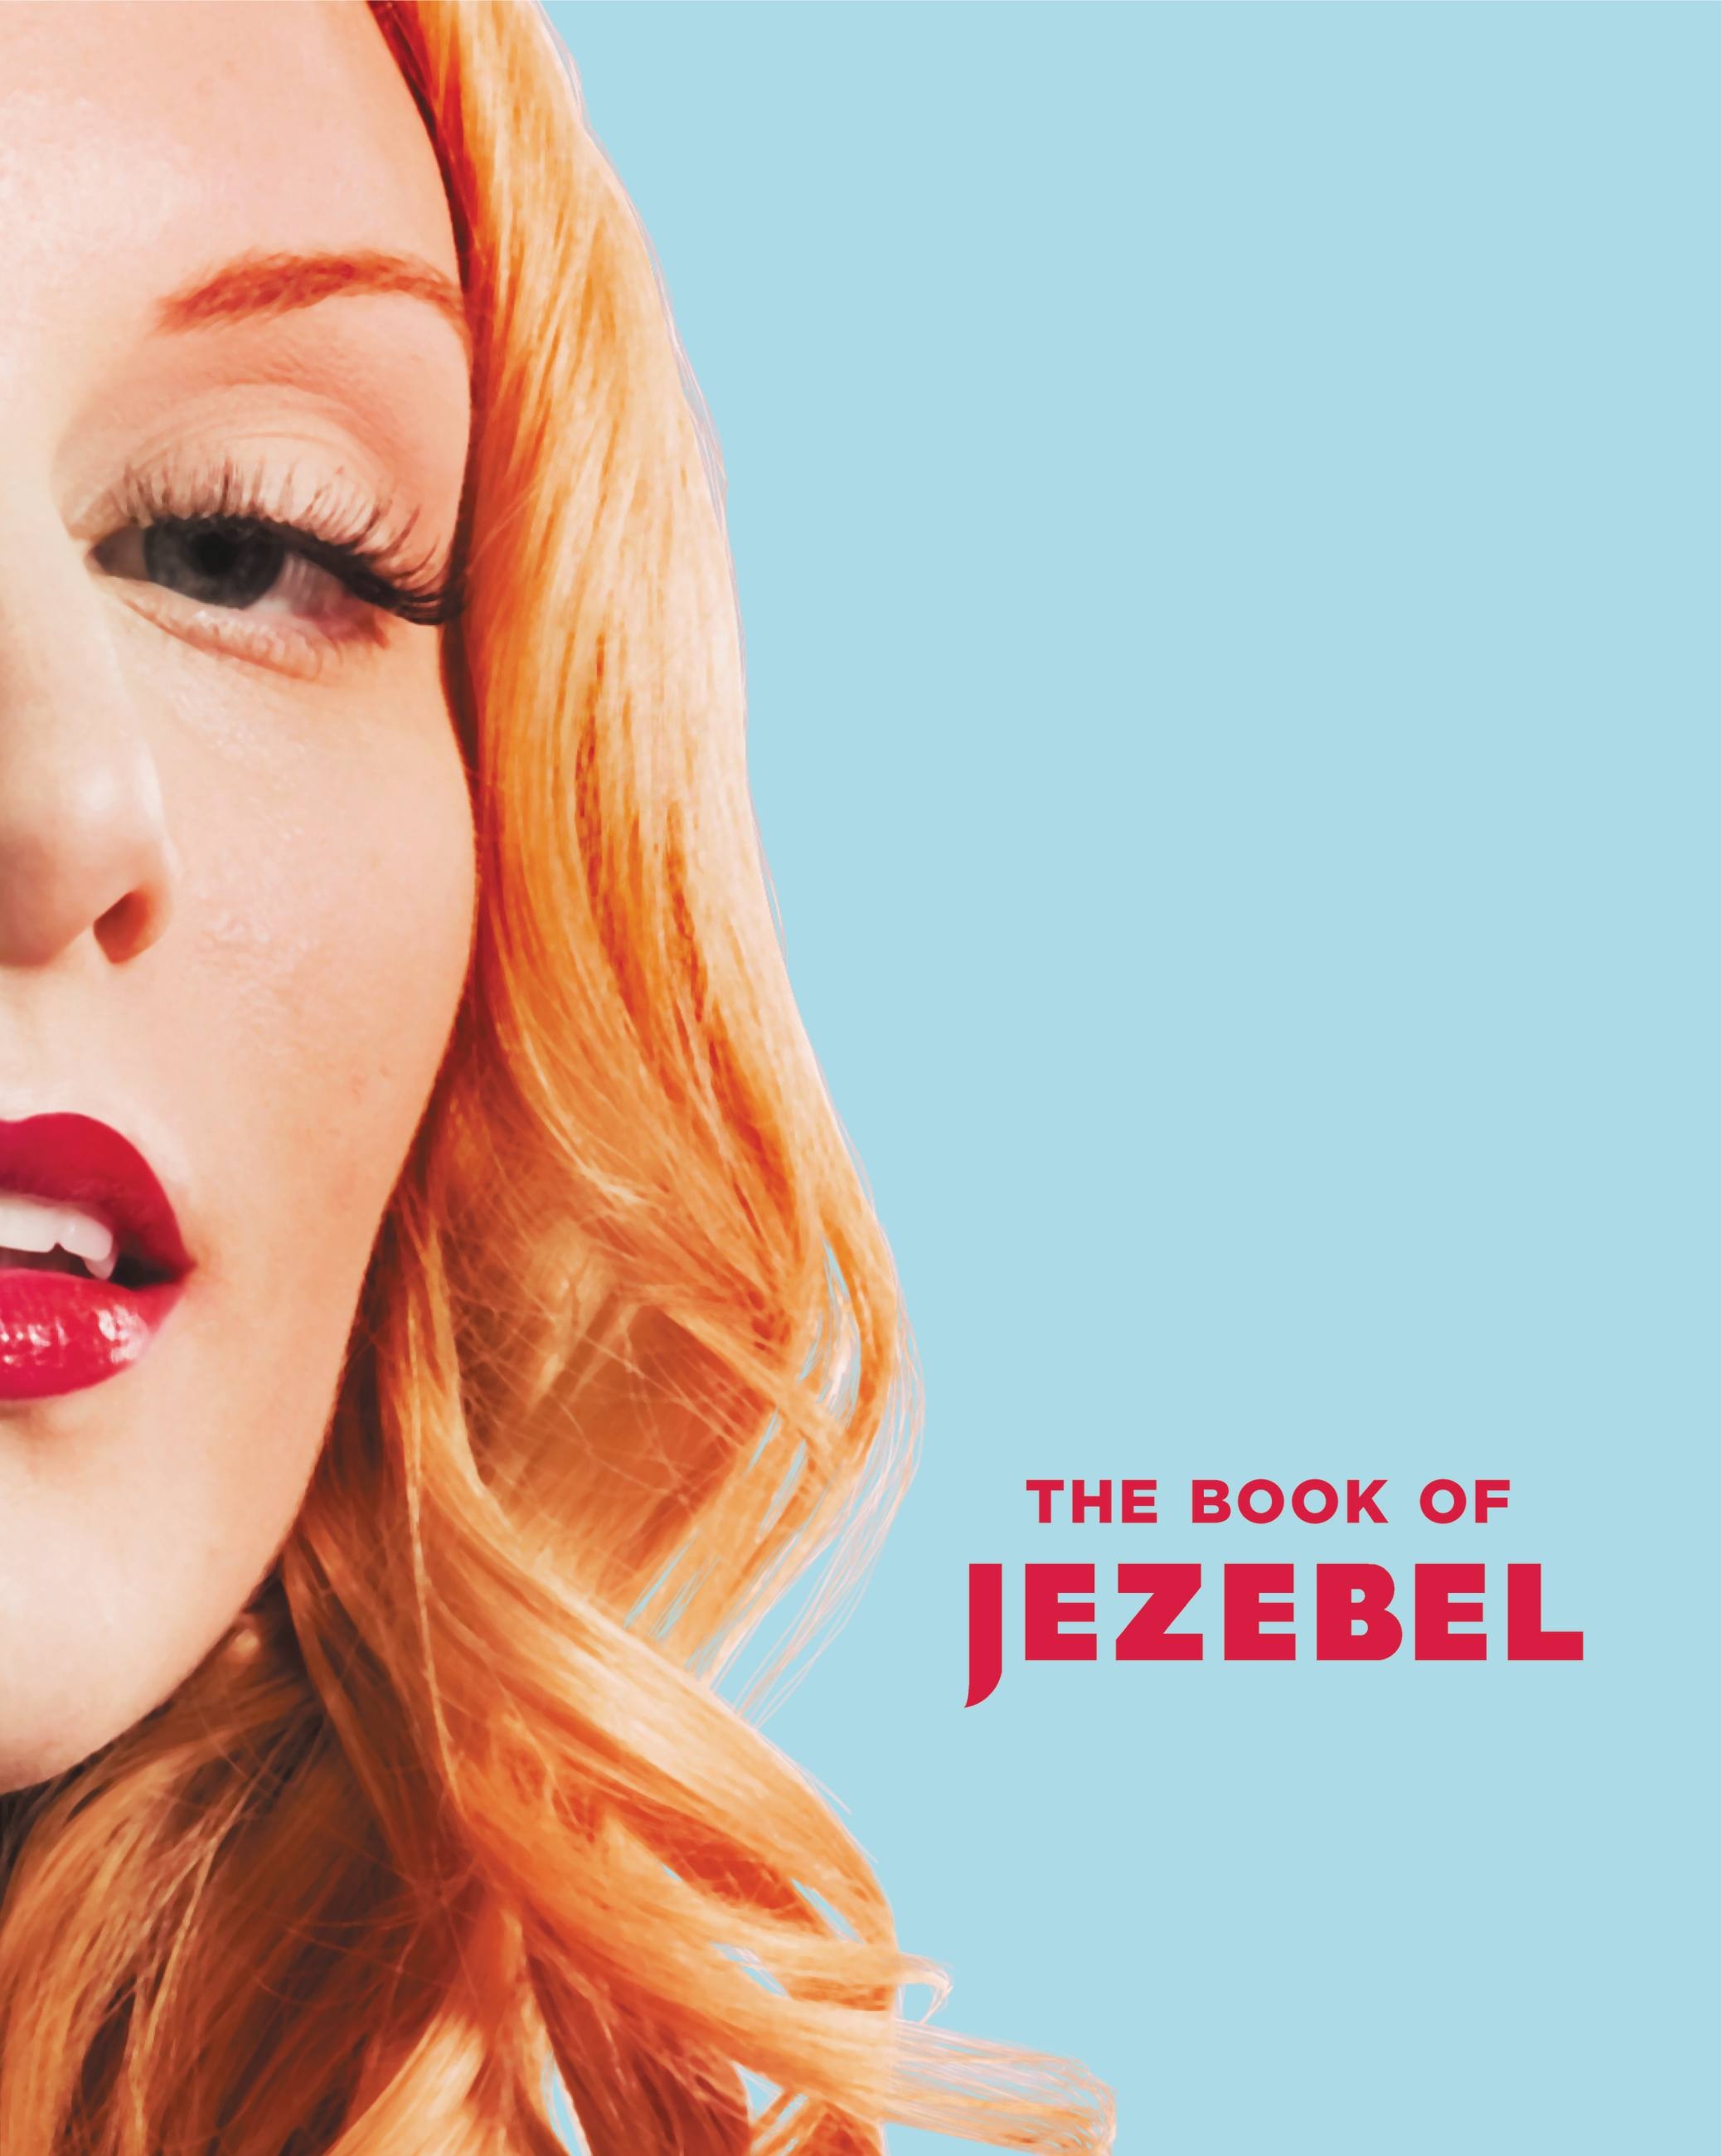 Petite Huge Cock Teen - The Book of Jezebel by Anna Holmes | Hachette Book Group